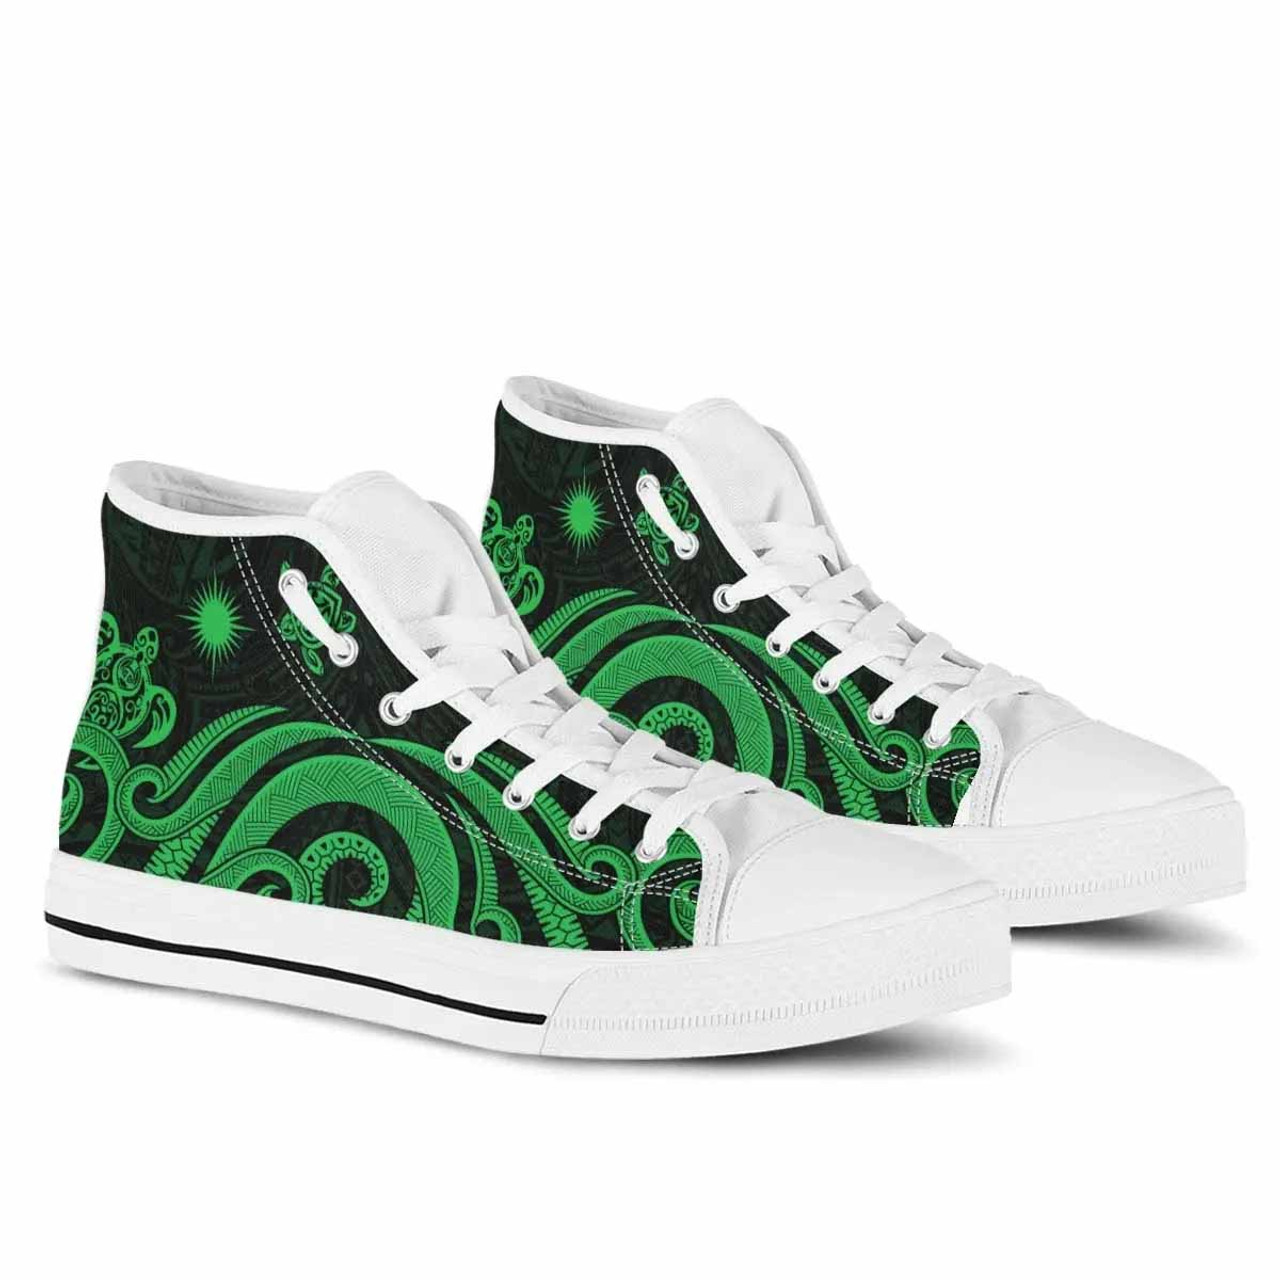 Marshall Islands High Top Shoes - Green Tentacle Turtle 10